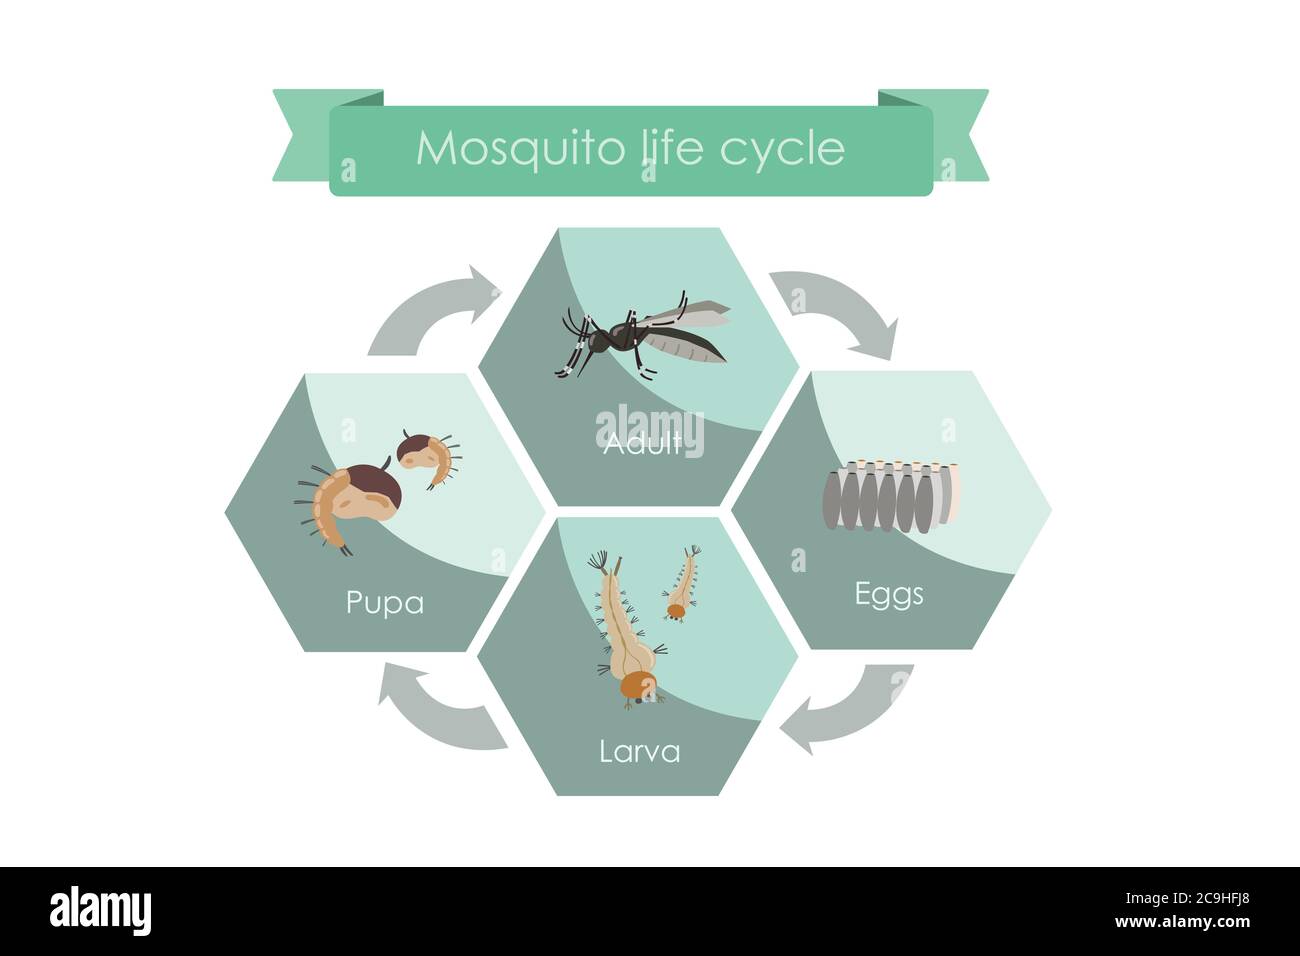 Life cycle of mosquitoes from egg to adult. Display chart showing life cycle of mosquito. Stock Vector